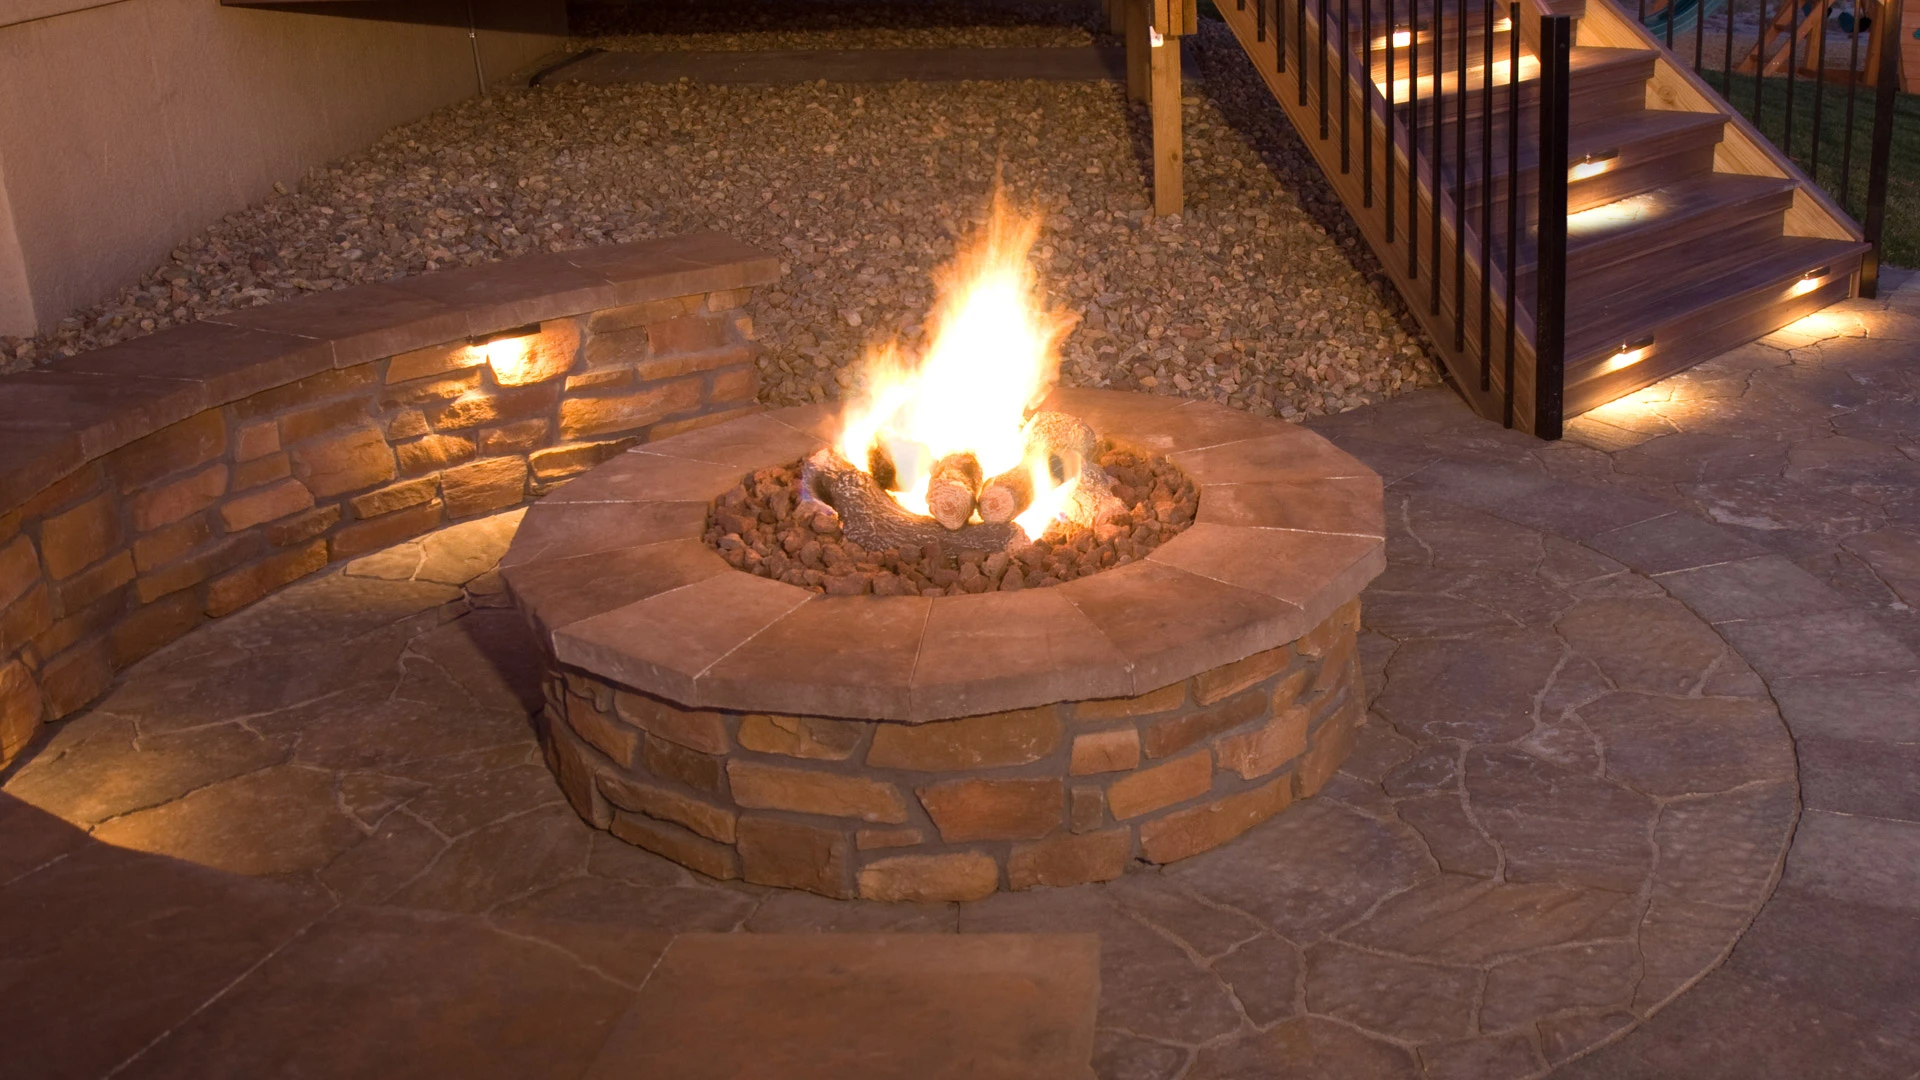 Recently constructed gas fire pit at a residential property in Loveland, CO.